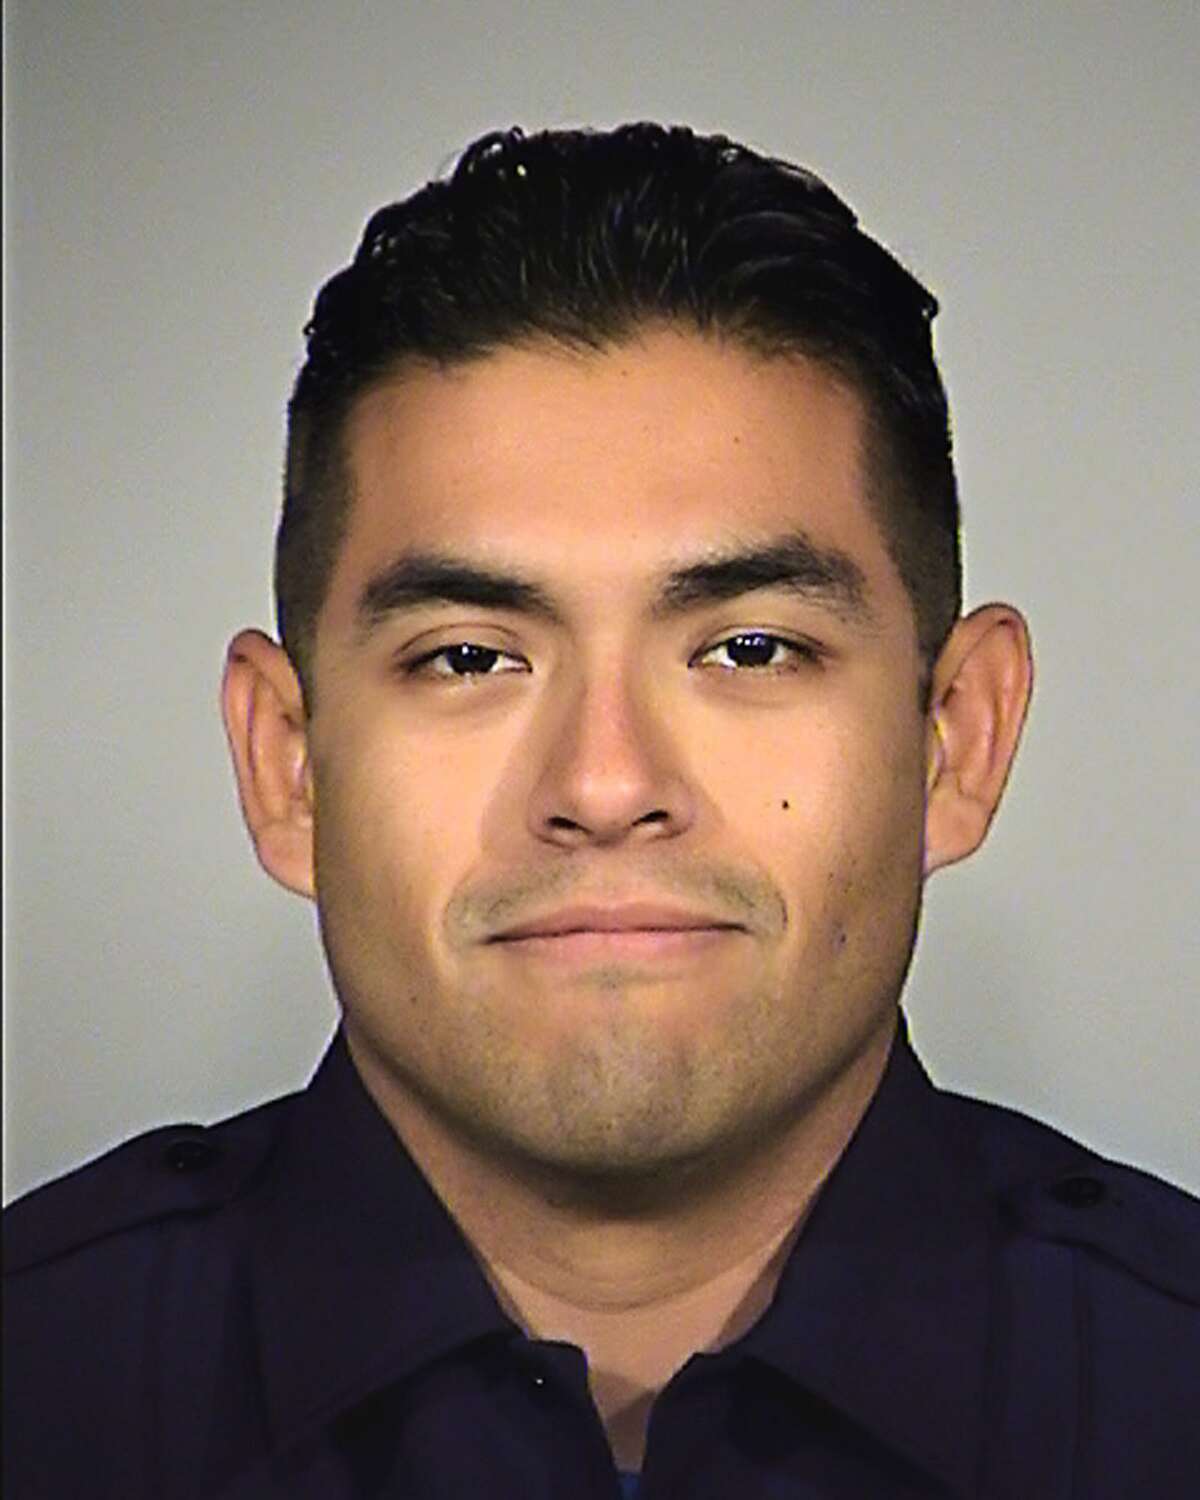 Officer Miguel Moreno died June 30, 2017, of wounds suffered when he and his partner were shot by a man they intended to question about a vehicle break-in, police said.